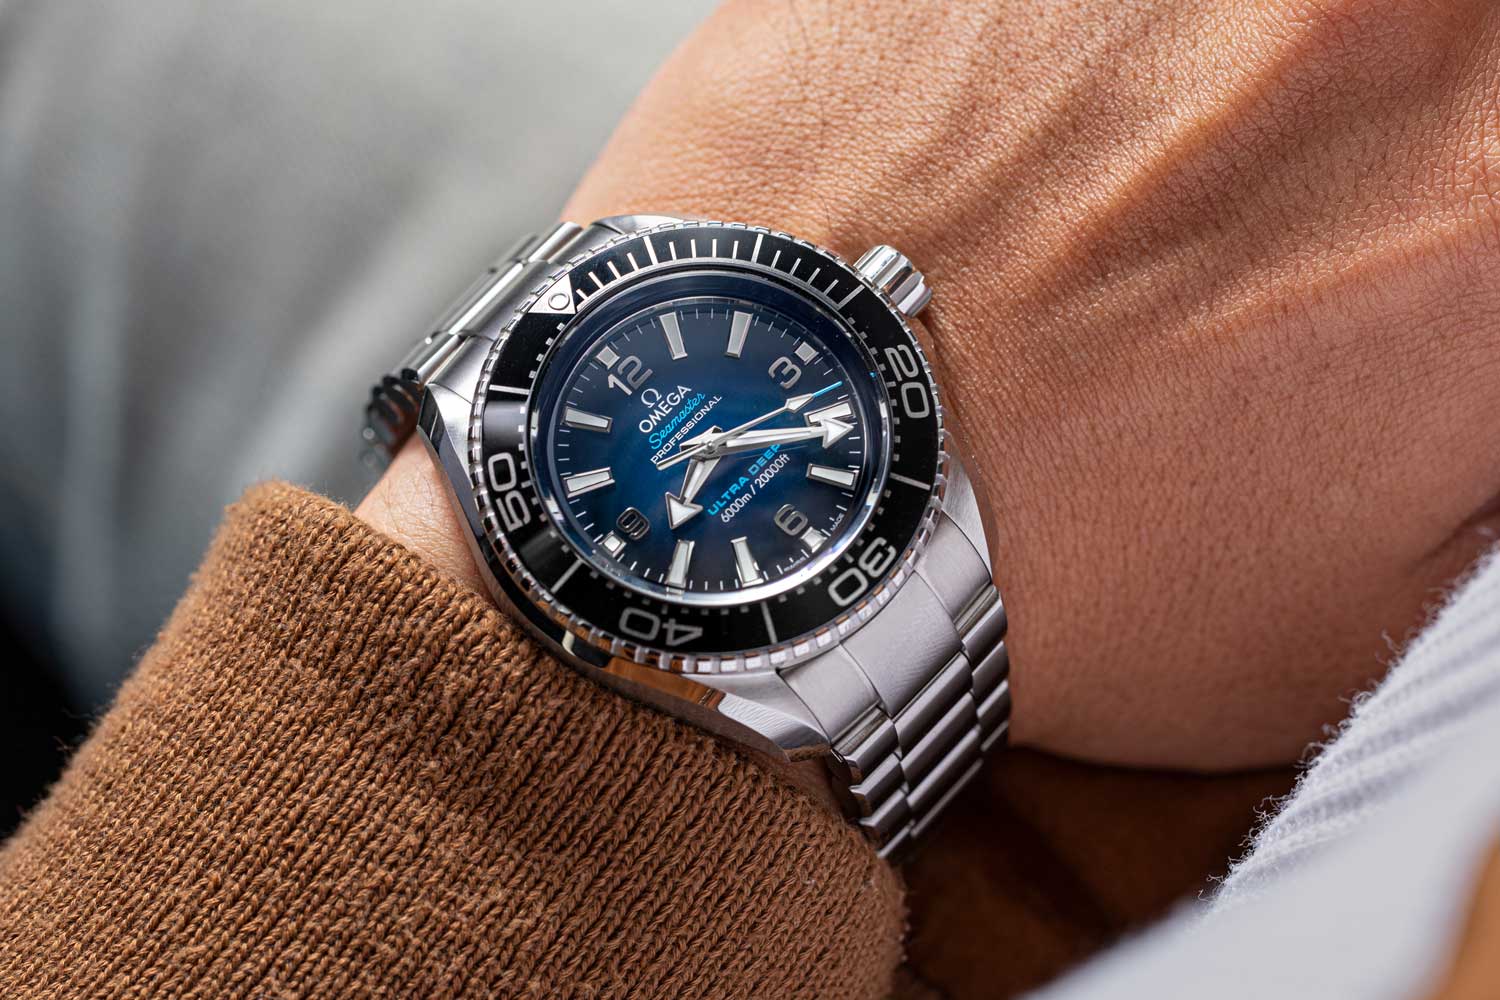 The full O-MEGASTEEL Ultra Deep is a beast of a watch and can feel quite top heavy with all that weight concentrated in the case. Or it can remind you that you’ve got on the biggest, baddest diver ever. (Image: Revolution©)